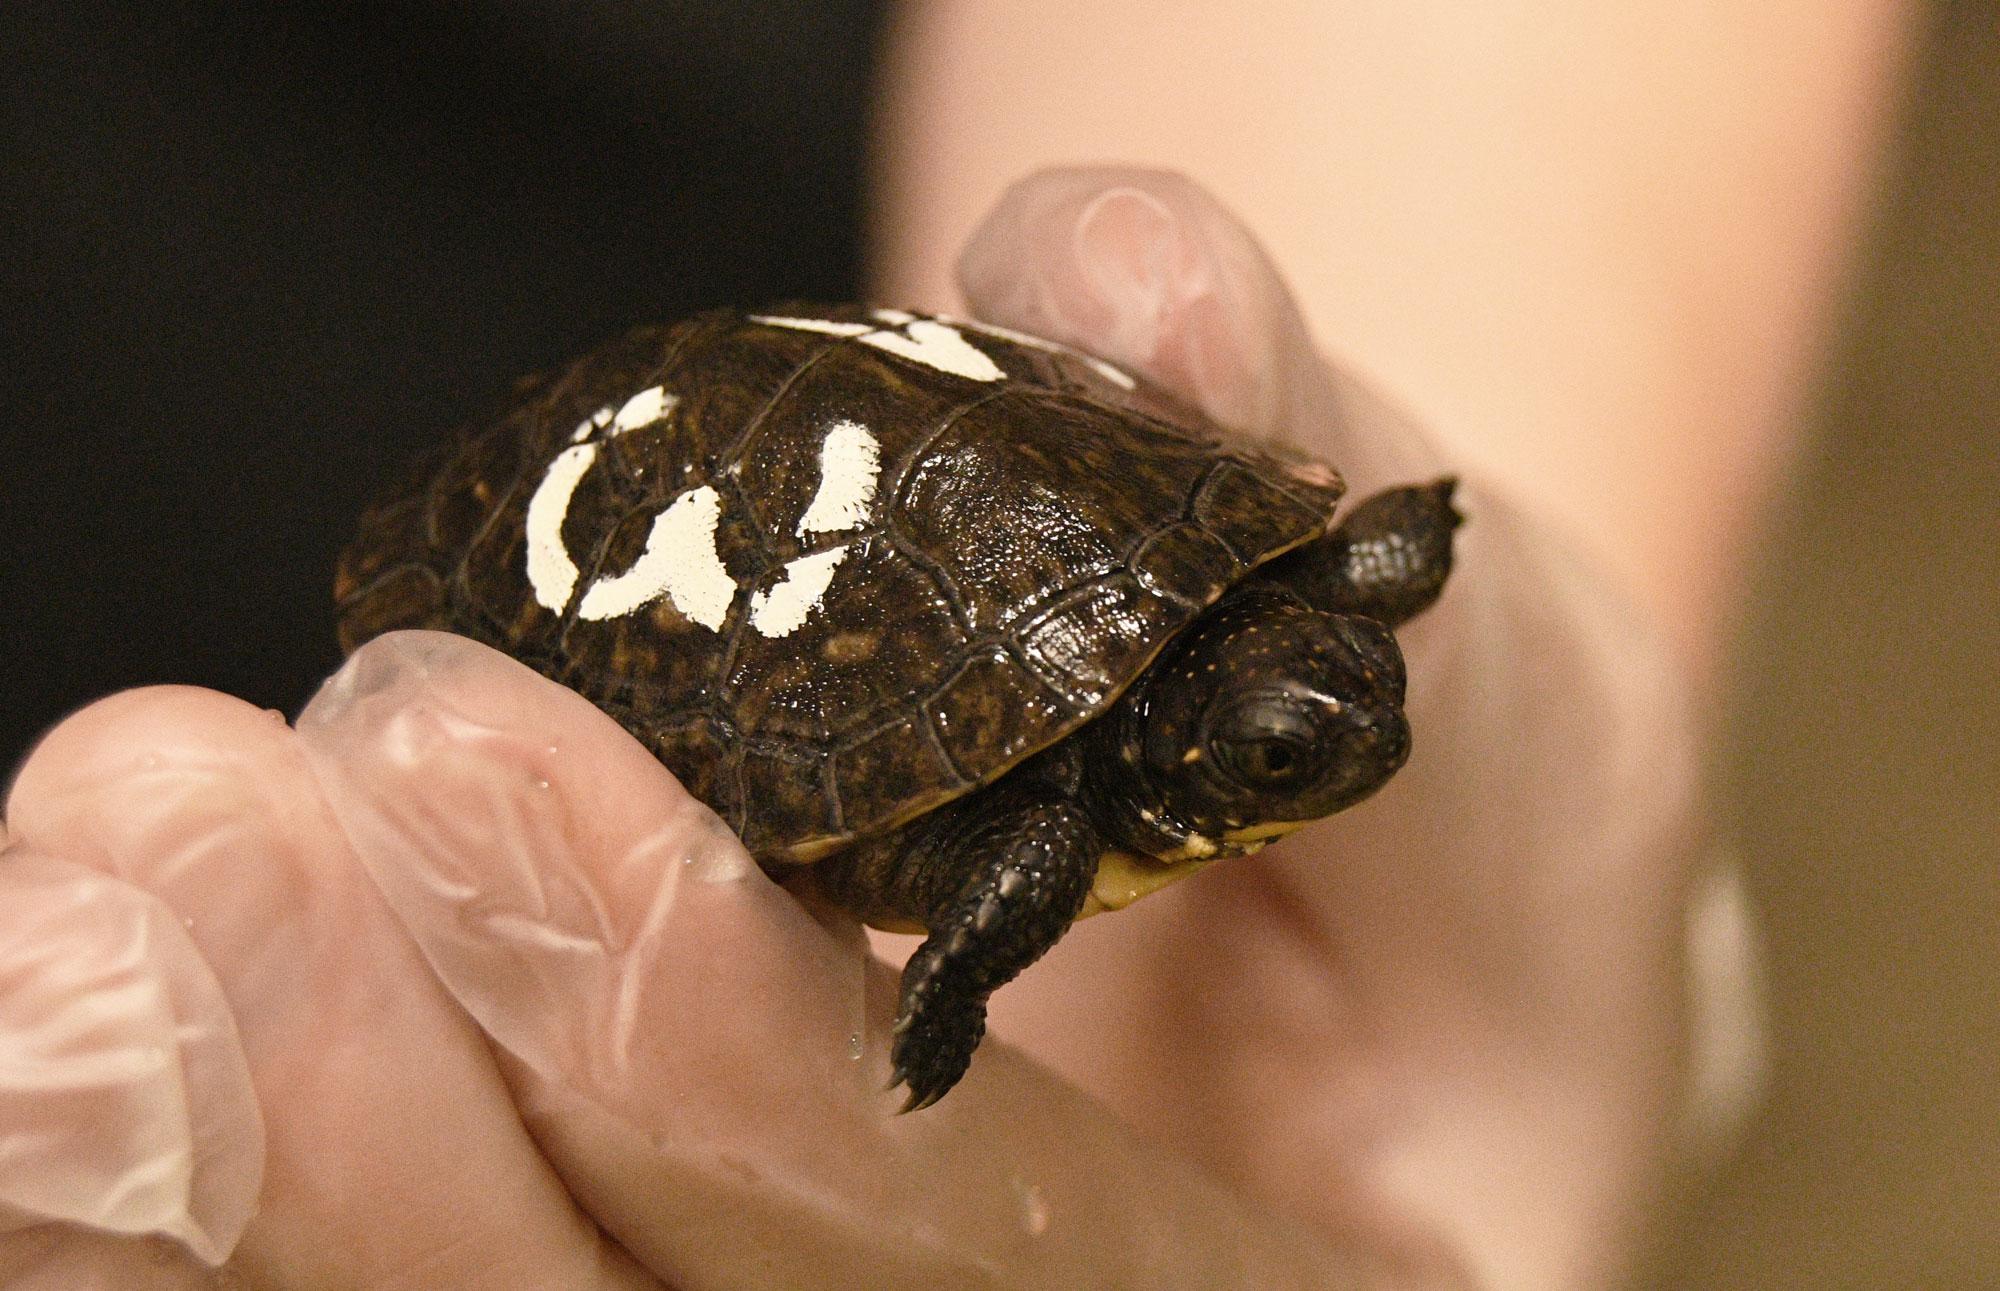 Photo for: Turtle Hit by Car in Morris Lives on Through Hatchlings